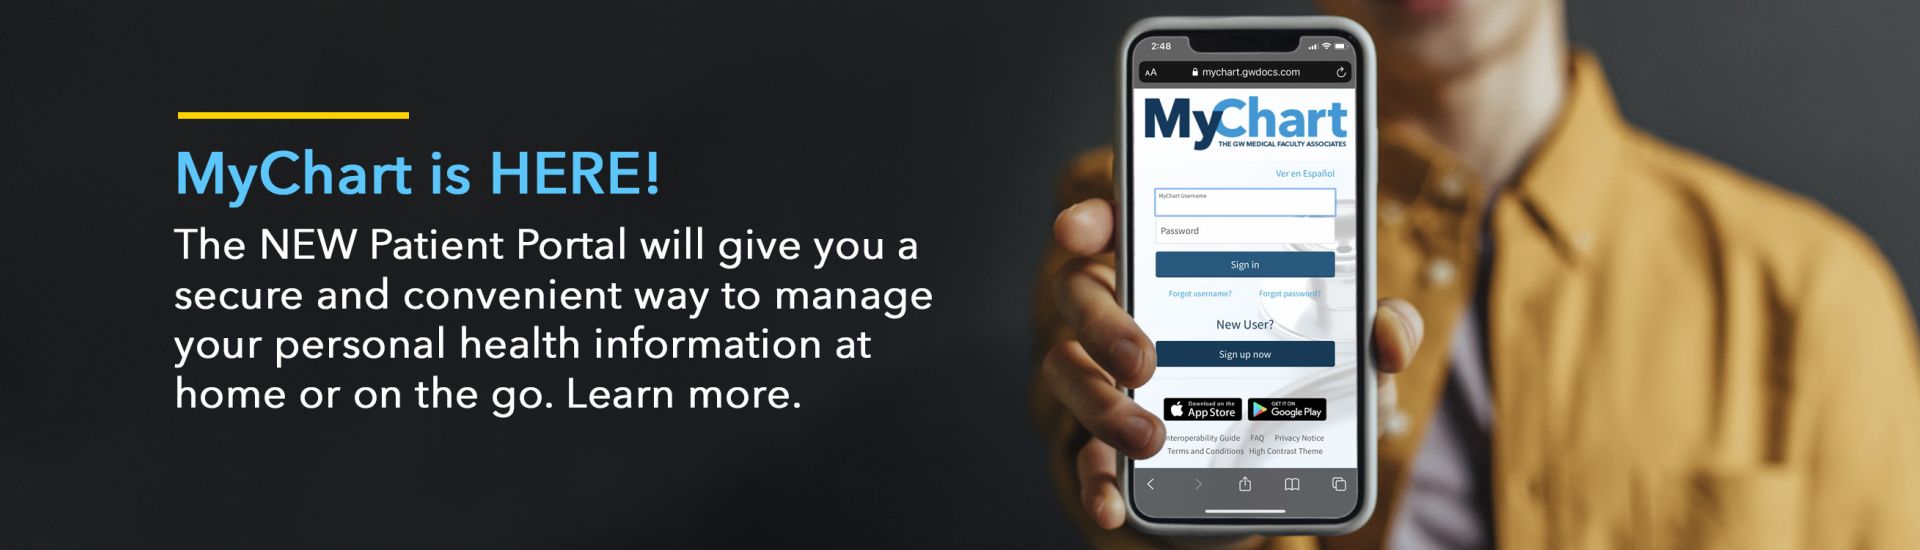 MyChart is HERE! The NEW Patient Portal will give you a secure and convenient way to manage your personal health information at home or on the go. Learn More | person wearing yellow shirt holding mobile phone with MyChart app